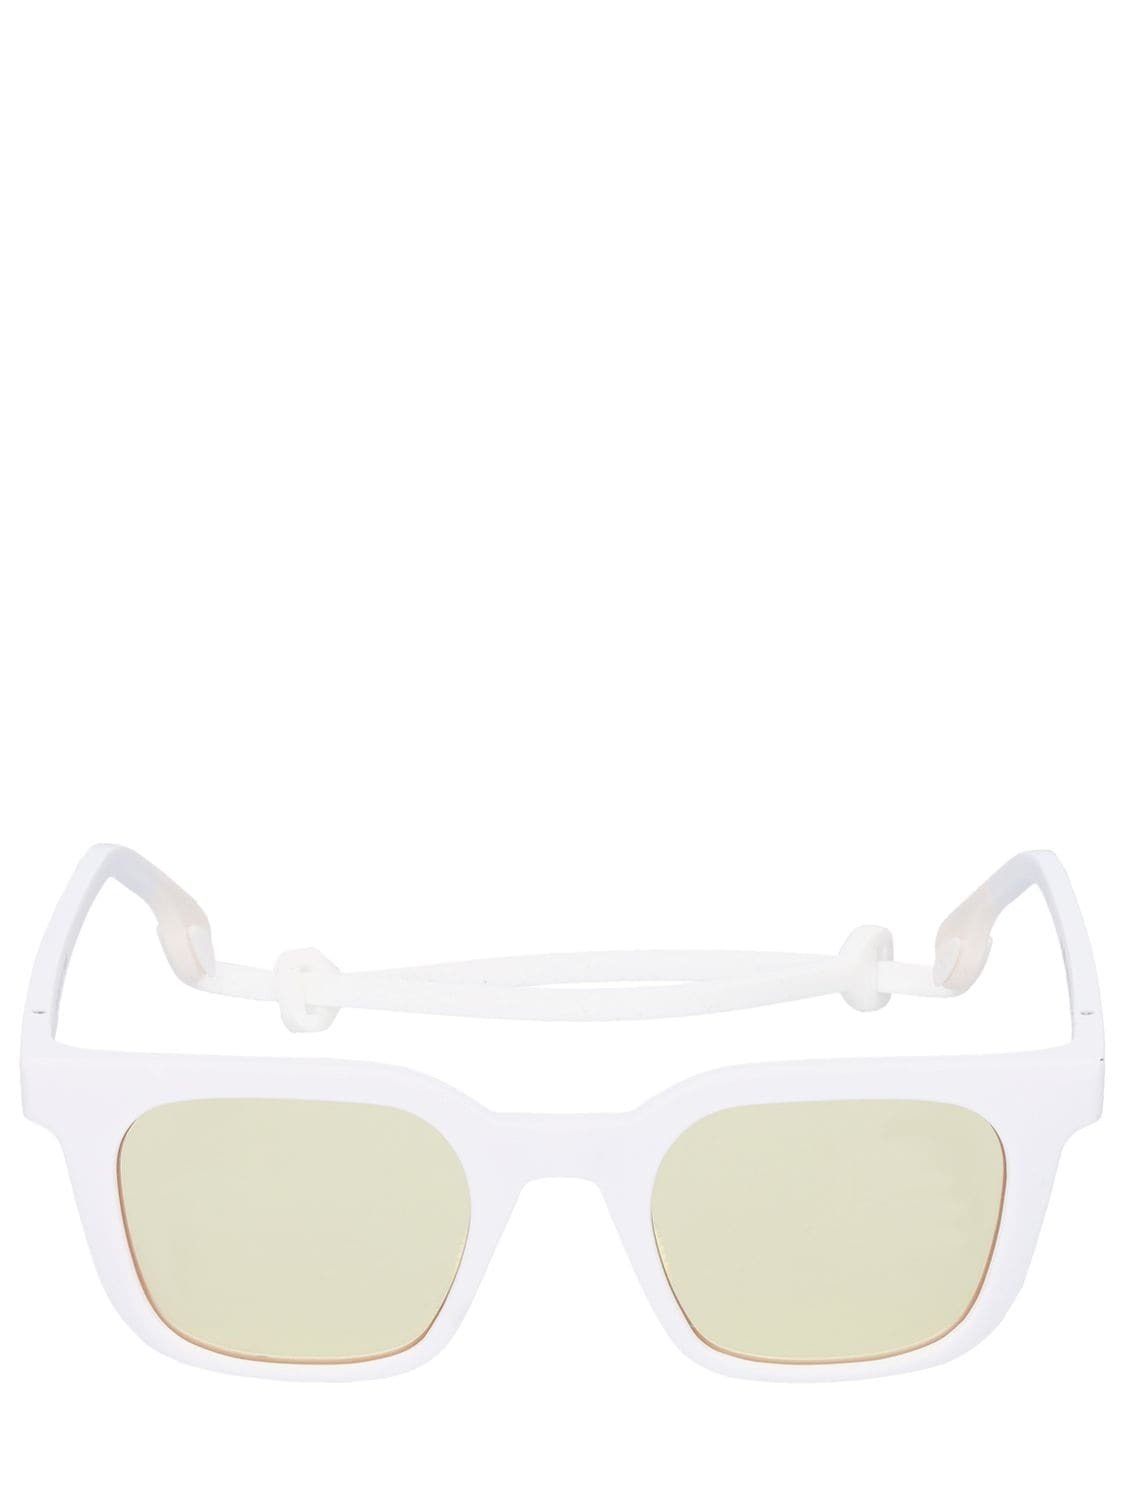 CHIMI Active Nksk Squared Sunglasses in white / yellow